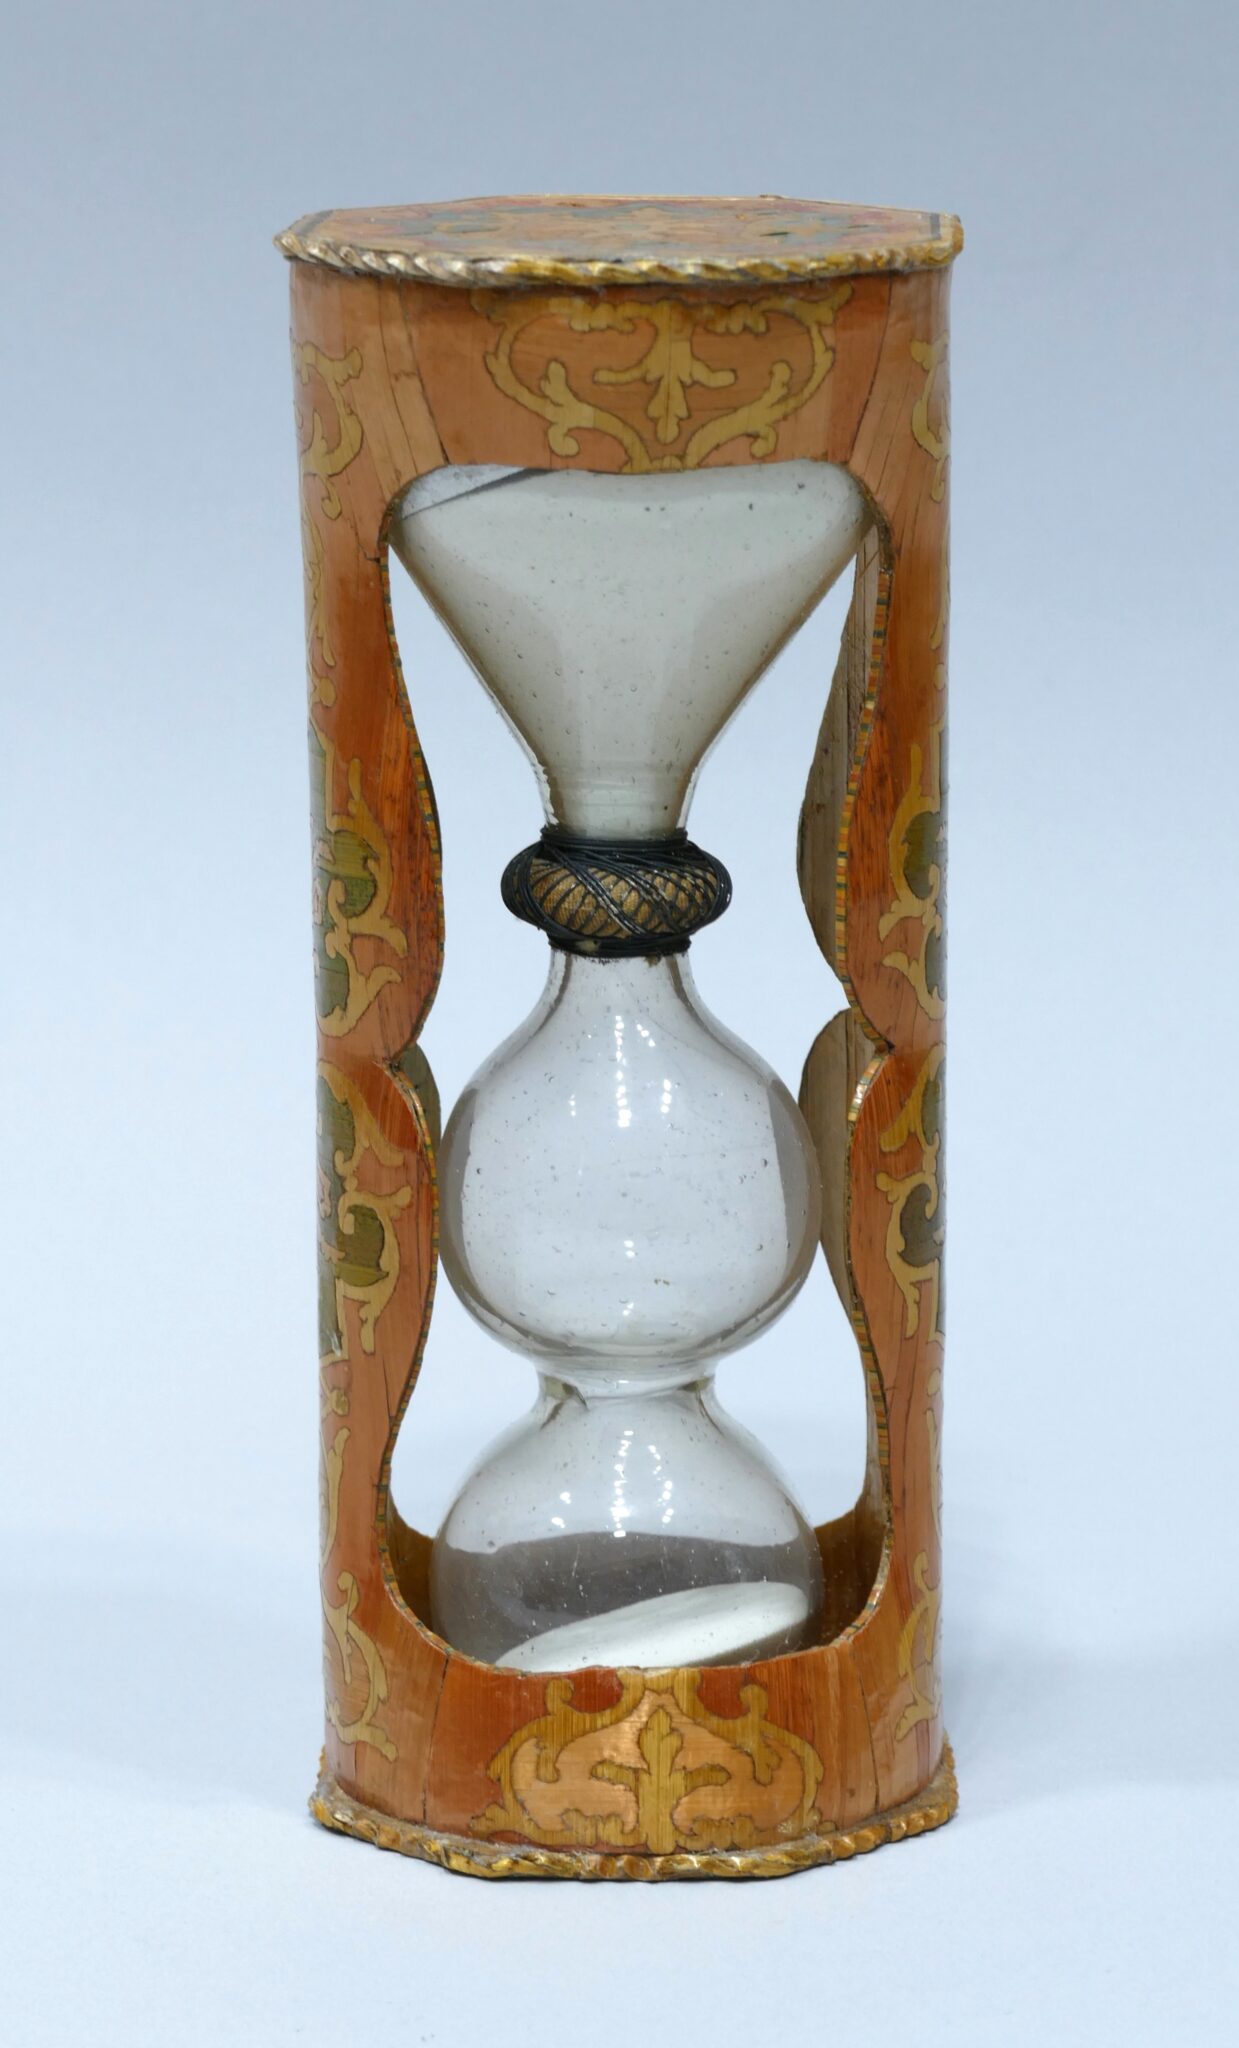 Hourglass in straw marquetry made in France circa 1720